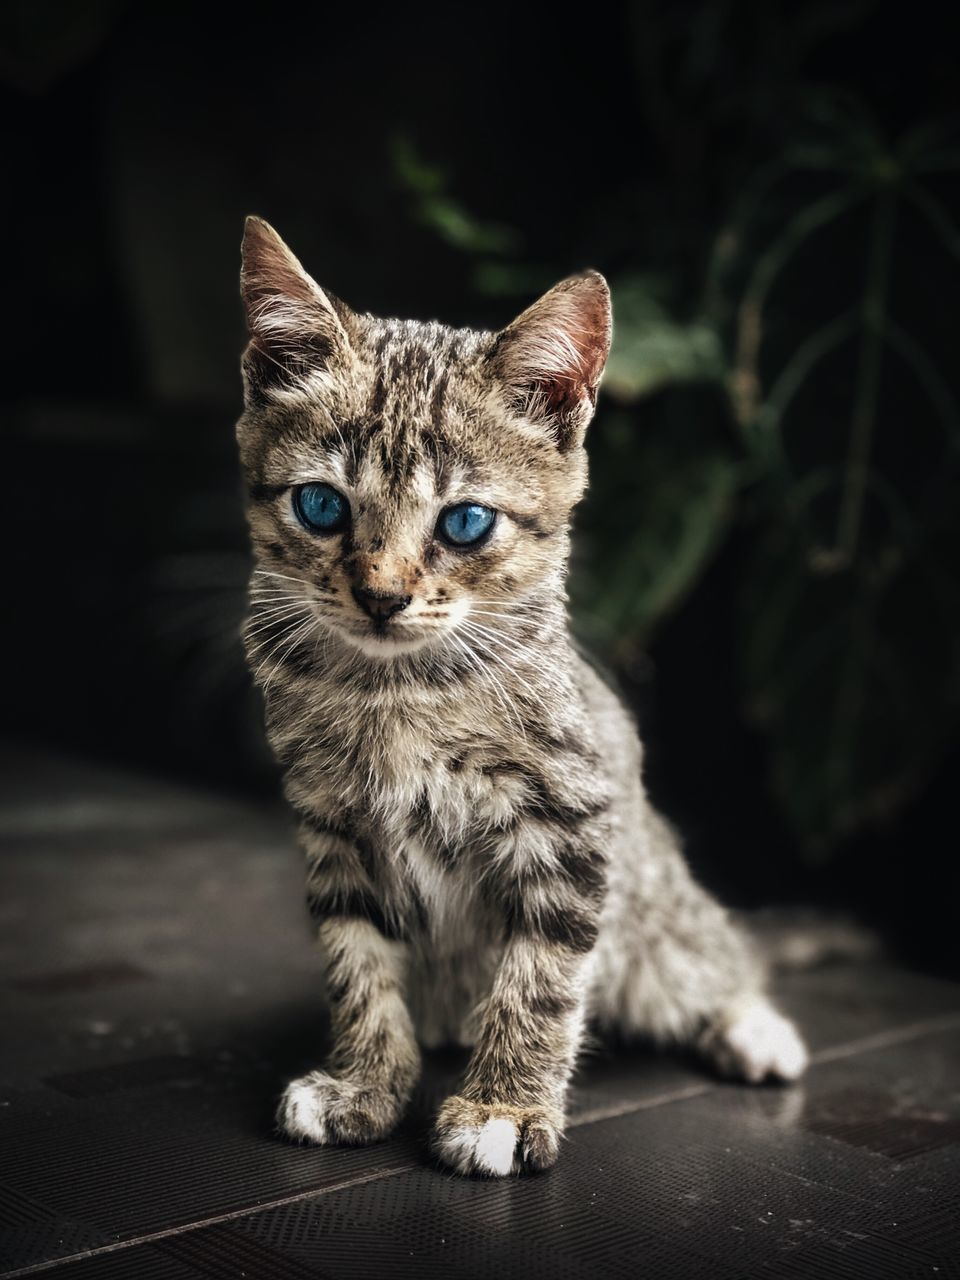 cat, one animal, pets, feline, mammal, domestic, domestic animals, domestic cat, vertebrate, whisker, portrait, no people, focus on foreground, looking at camera, looking, young animal, close-up, kitten, animal eye, tabby